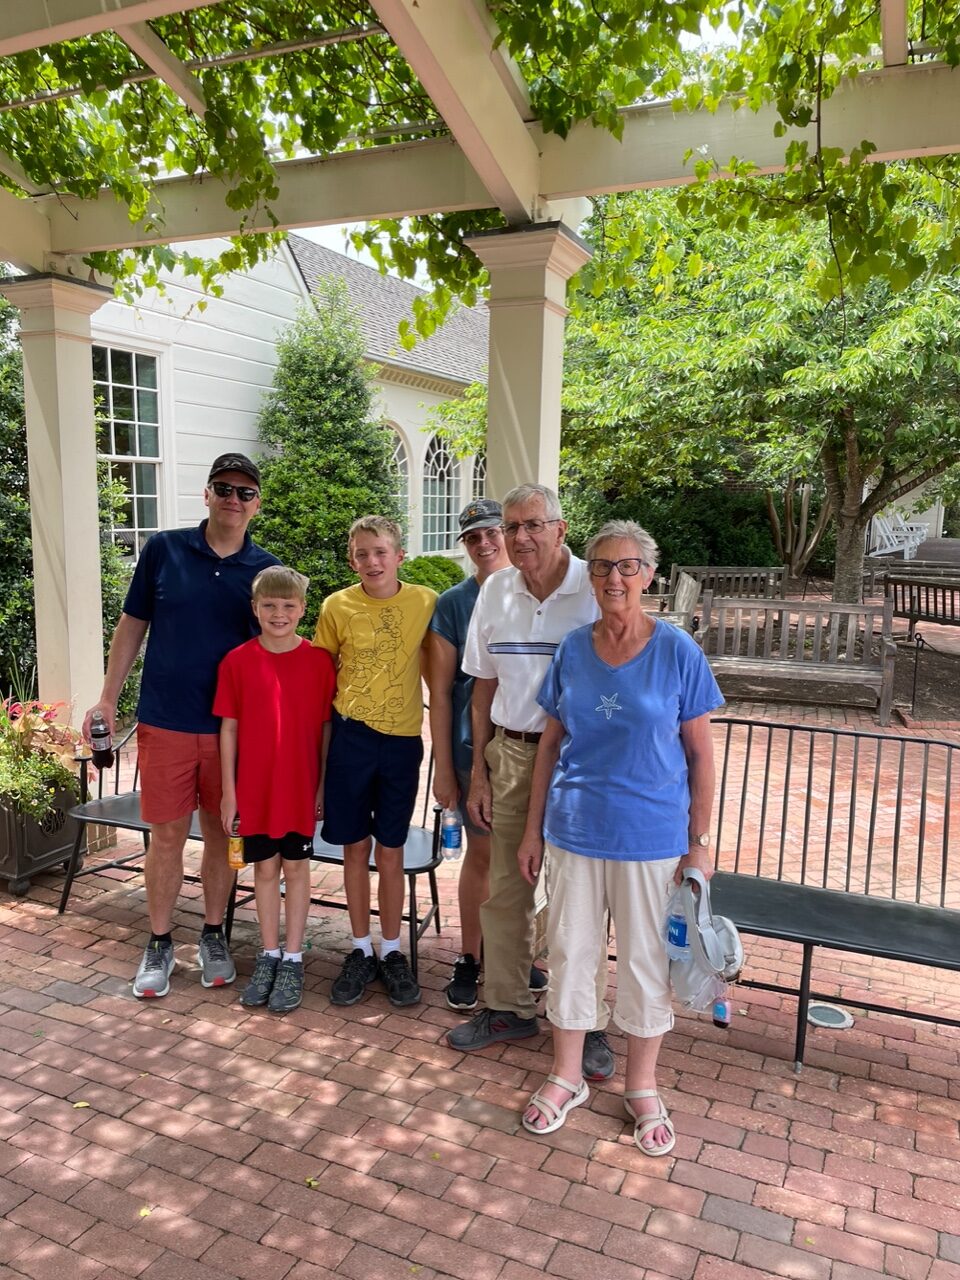 Ben, second from right, posing with family while on a trip in June 2022